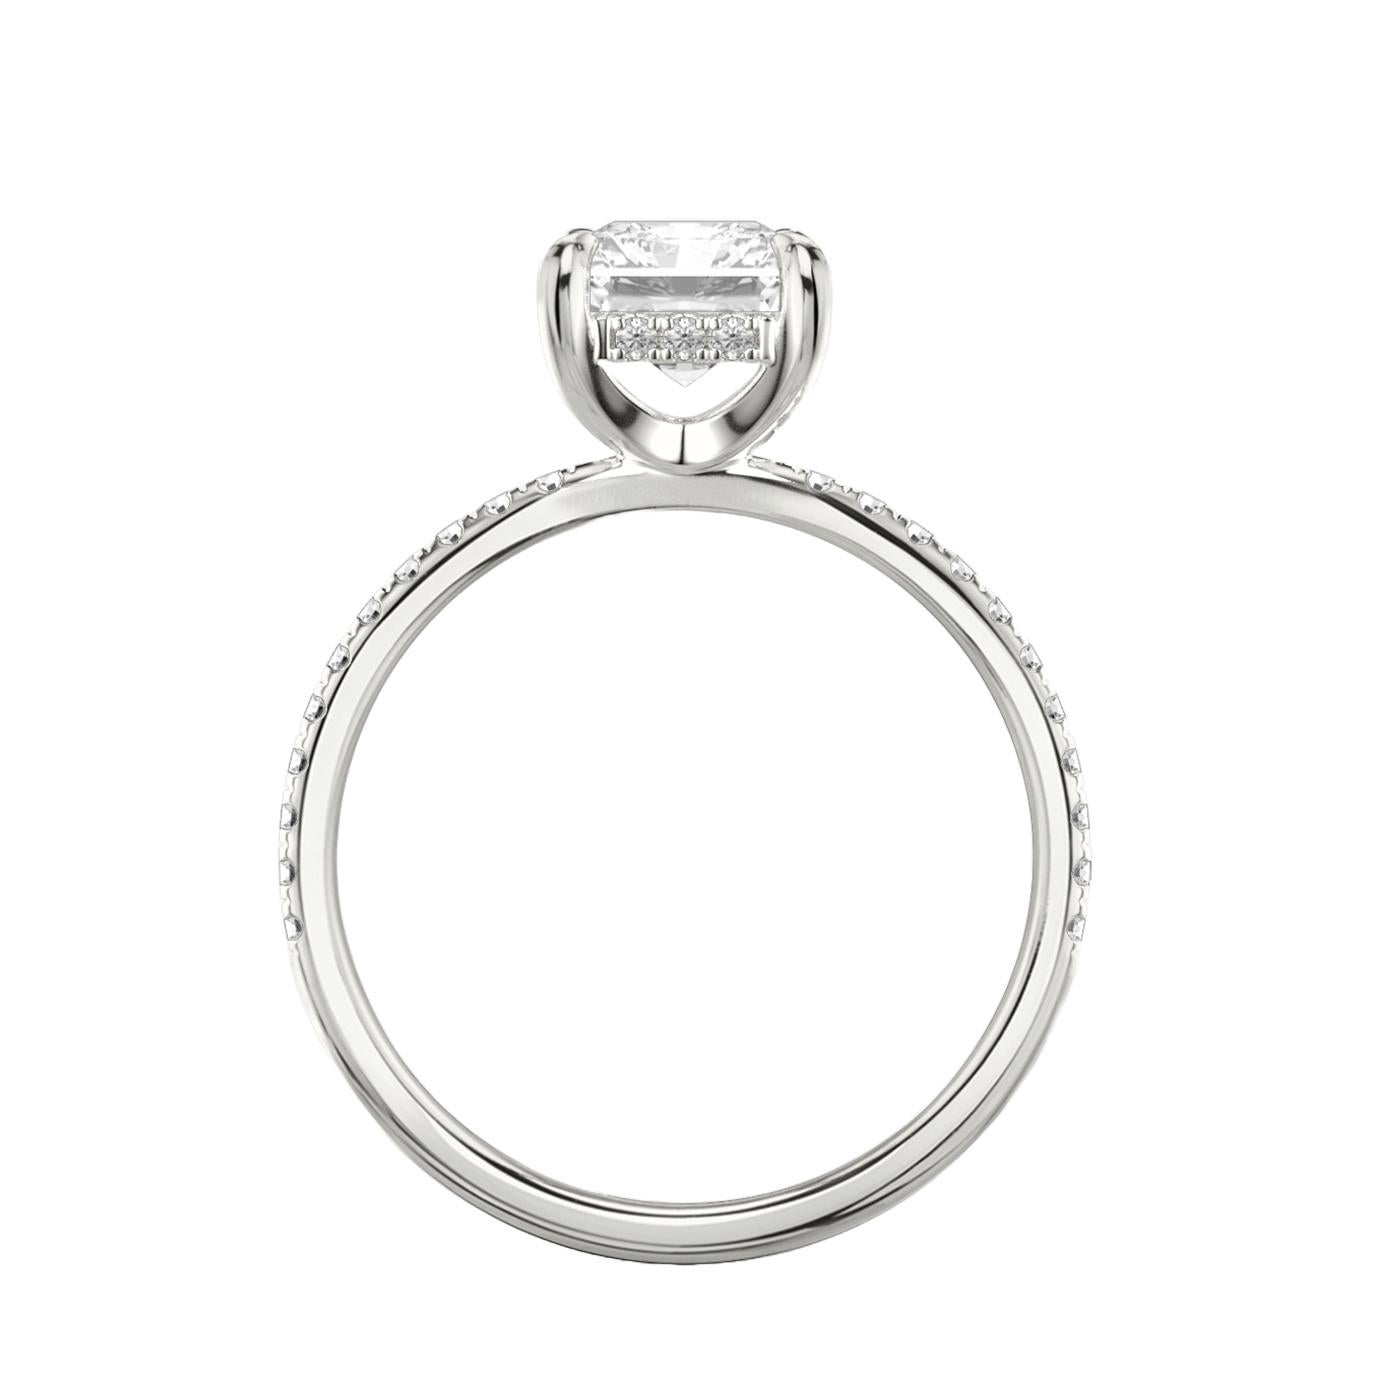 GIA 3.03ct Natural Radiant Cut Diamond with Pave Diamonds Ring 18k White Gold In Good Condition For Sale In Aventura, FL